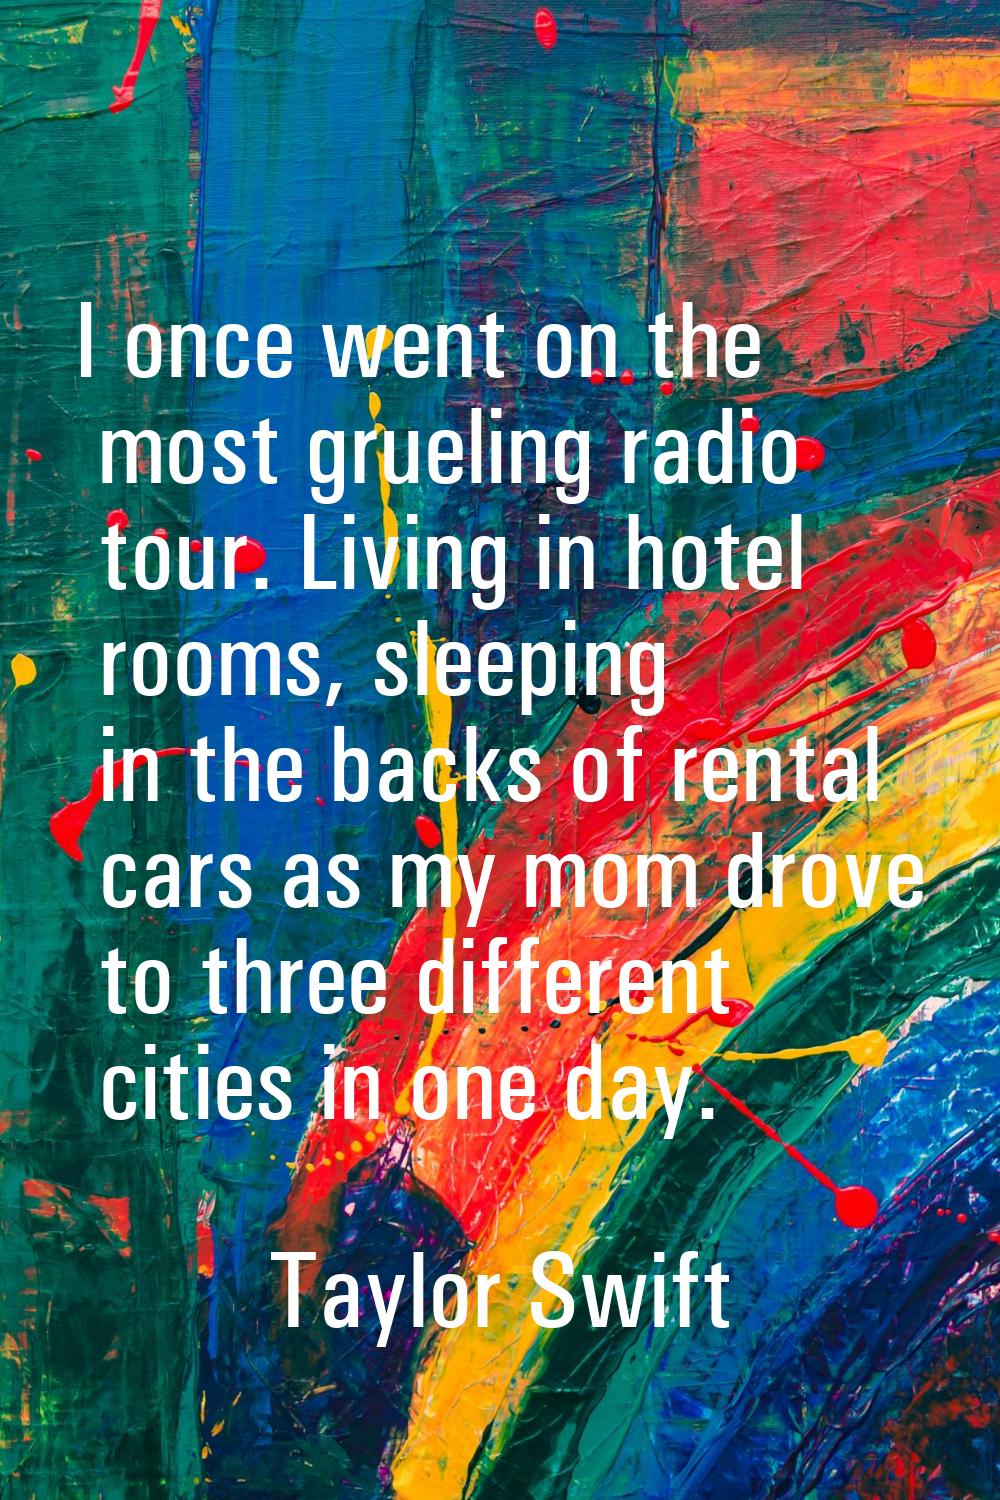 I once went on the most grueling radio tour. Living in hotel rooms, sleeping in the backs of rental